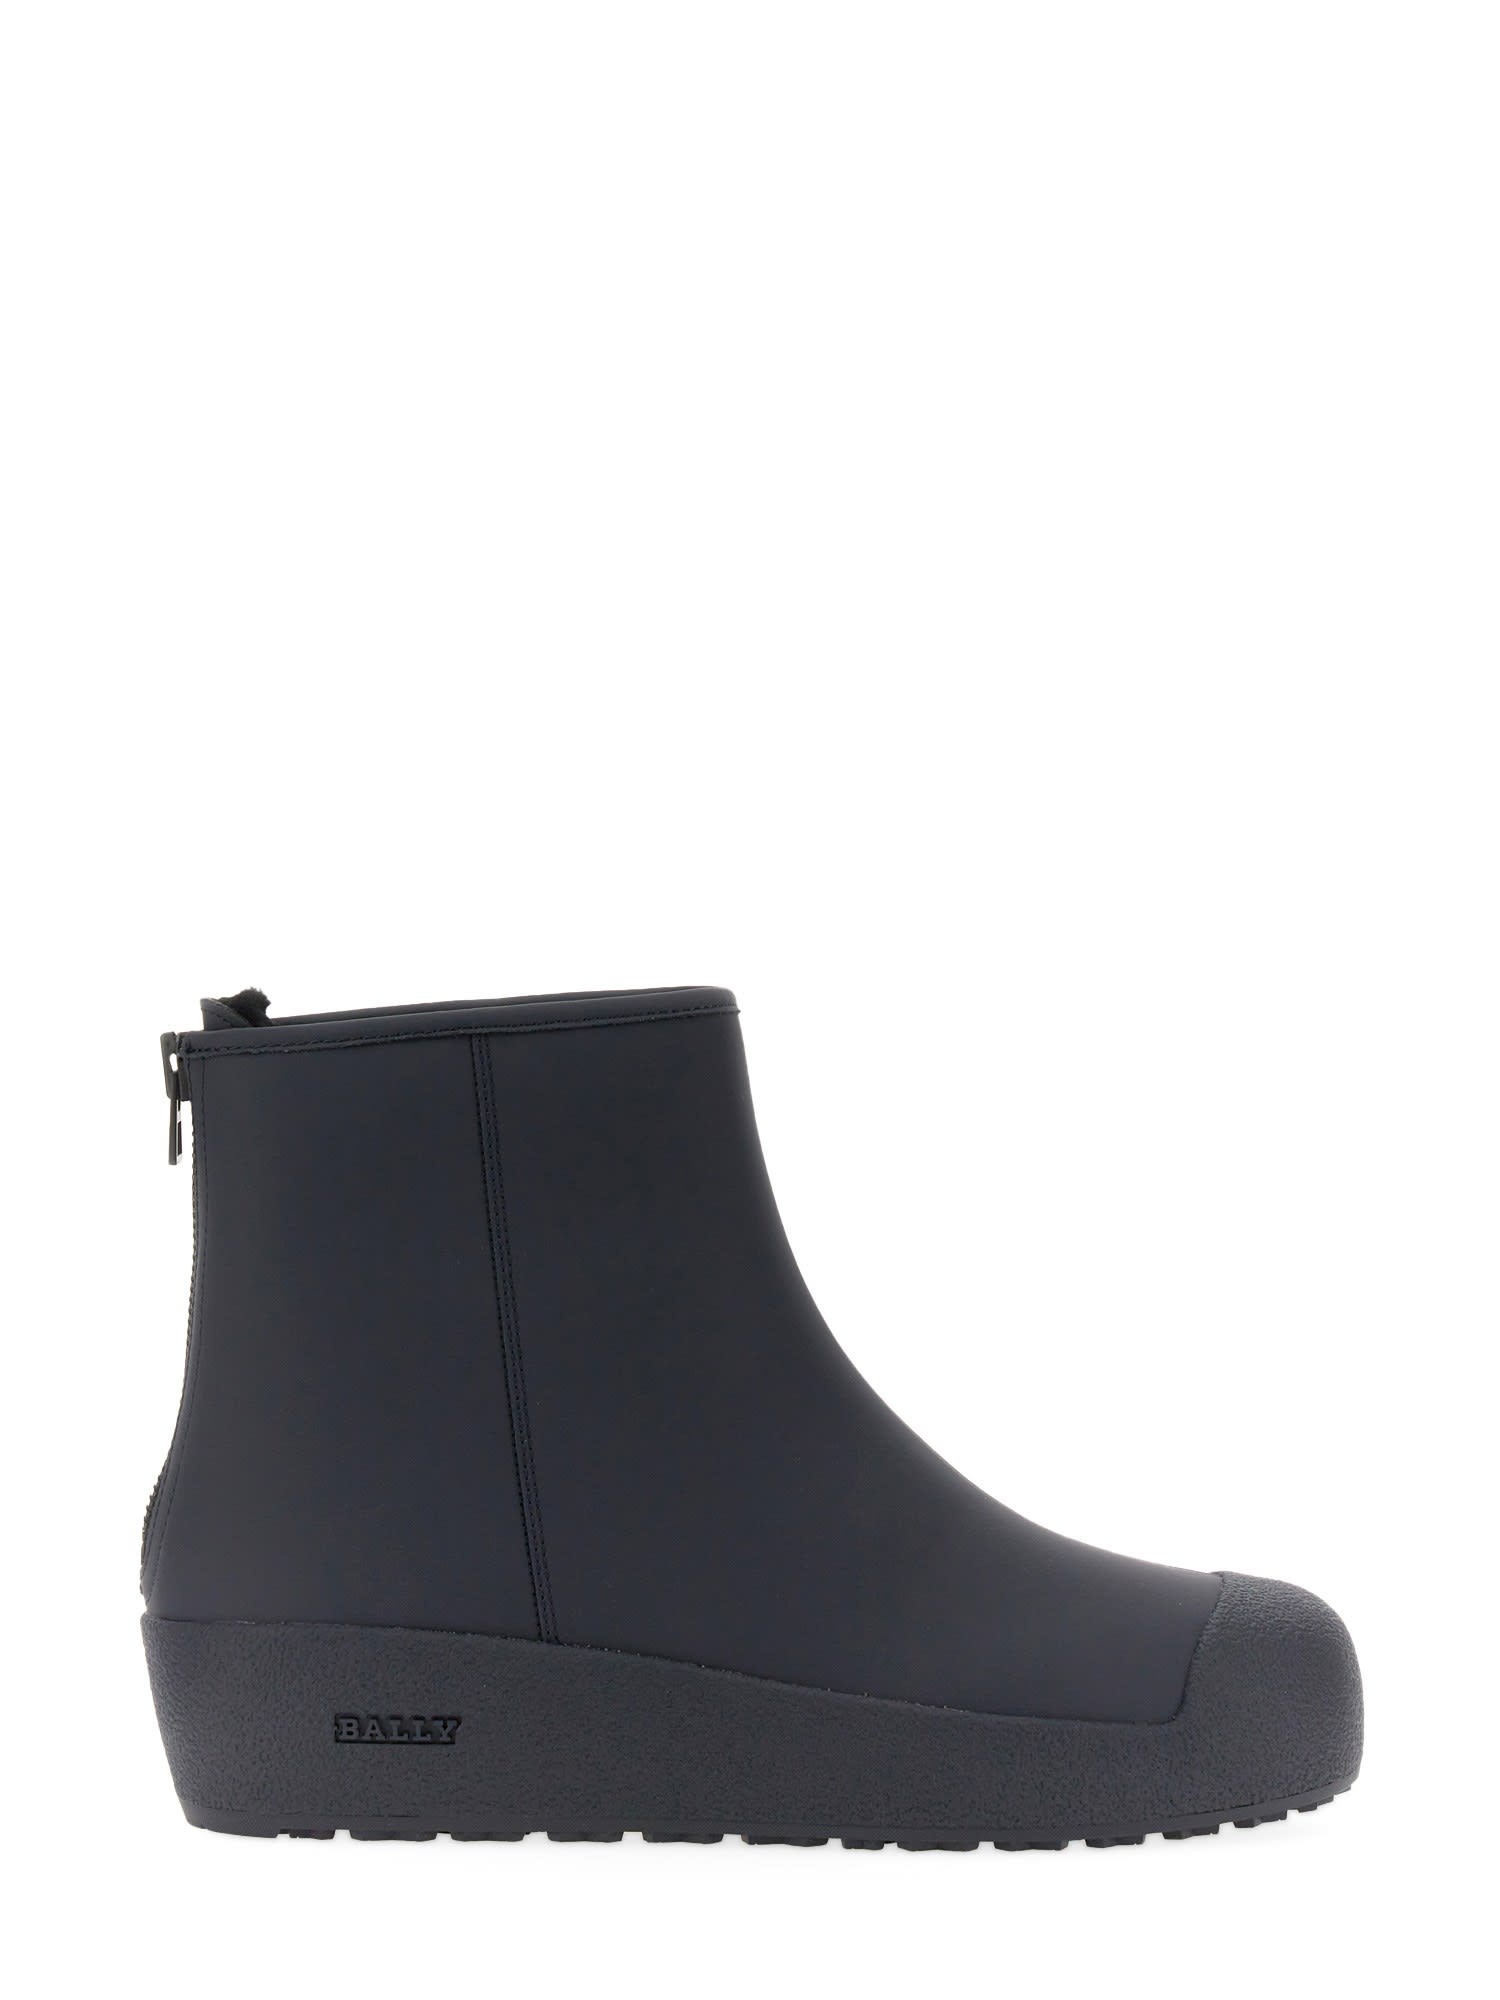 BALLY CURLING BOOT